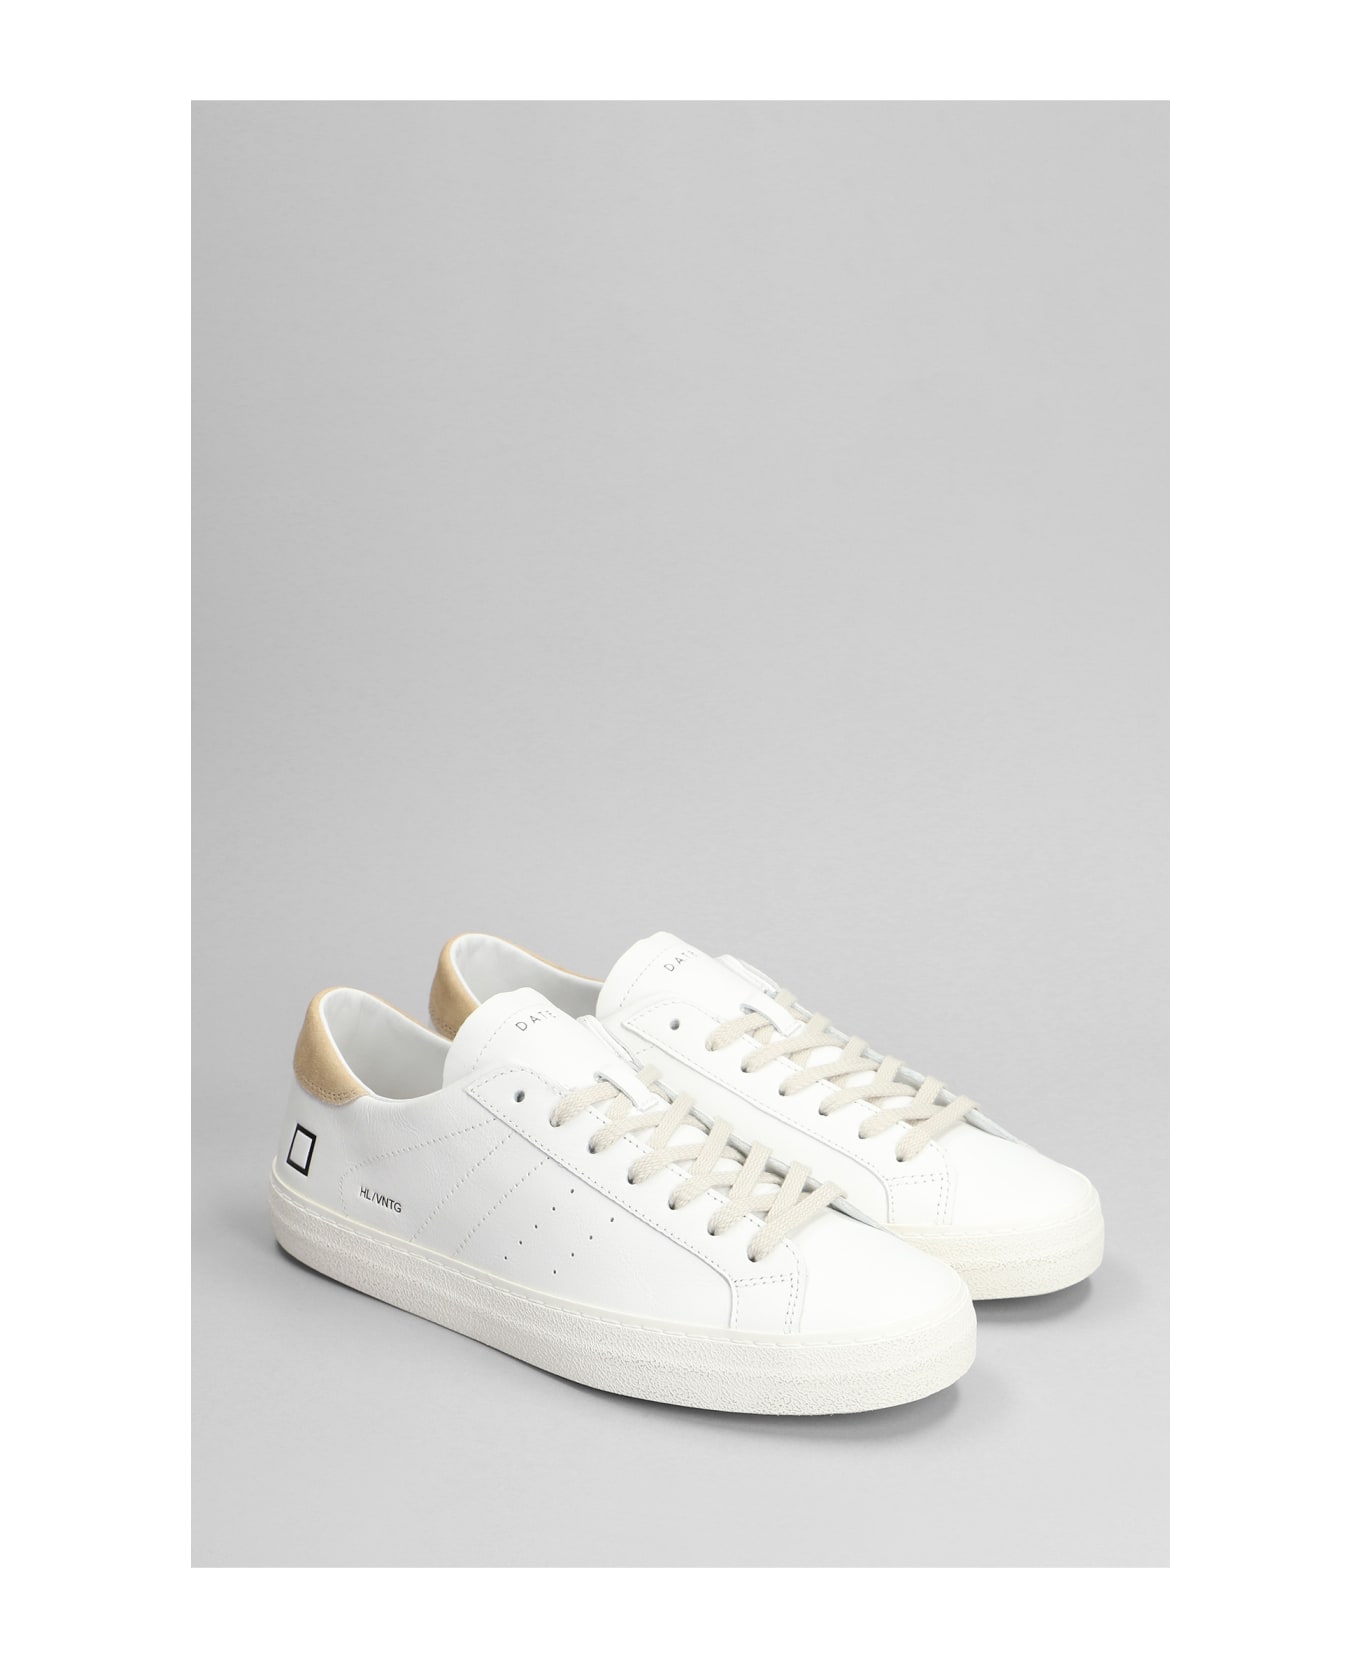 D.A.T.E. Hill Low Sneakers In White Leather D.A.T.E. - WHITE スニーカー